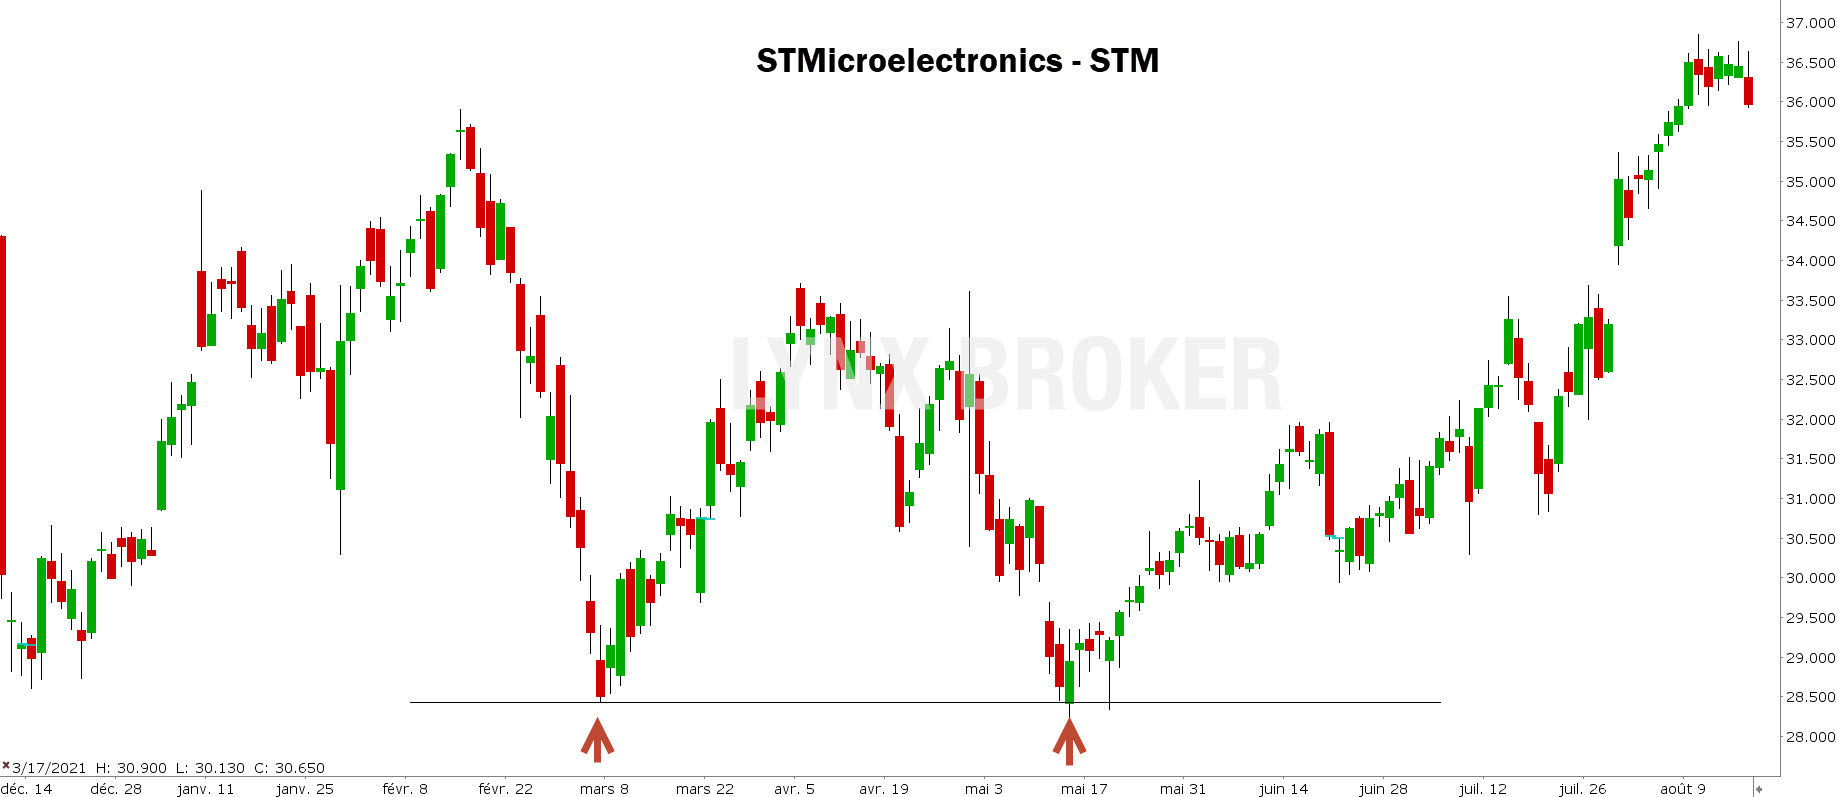 ordre stop loss – ordre stop – graphique STMicroelectronics